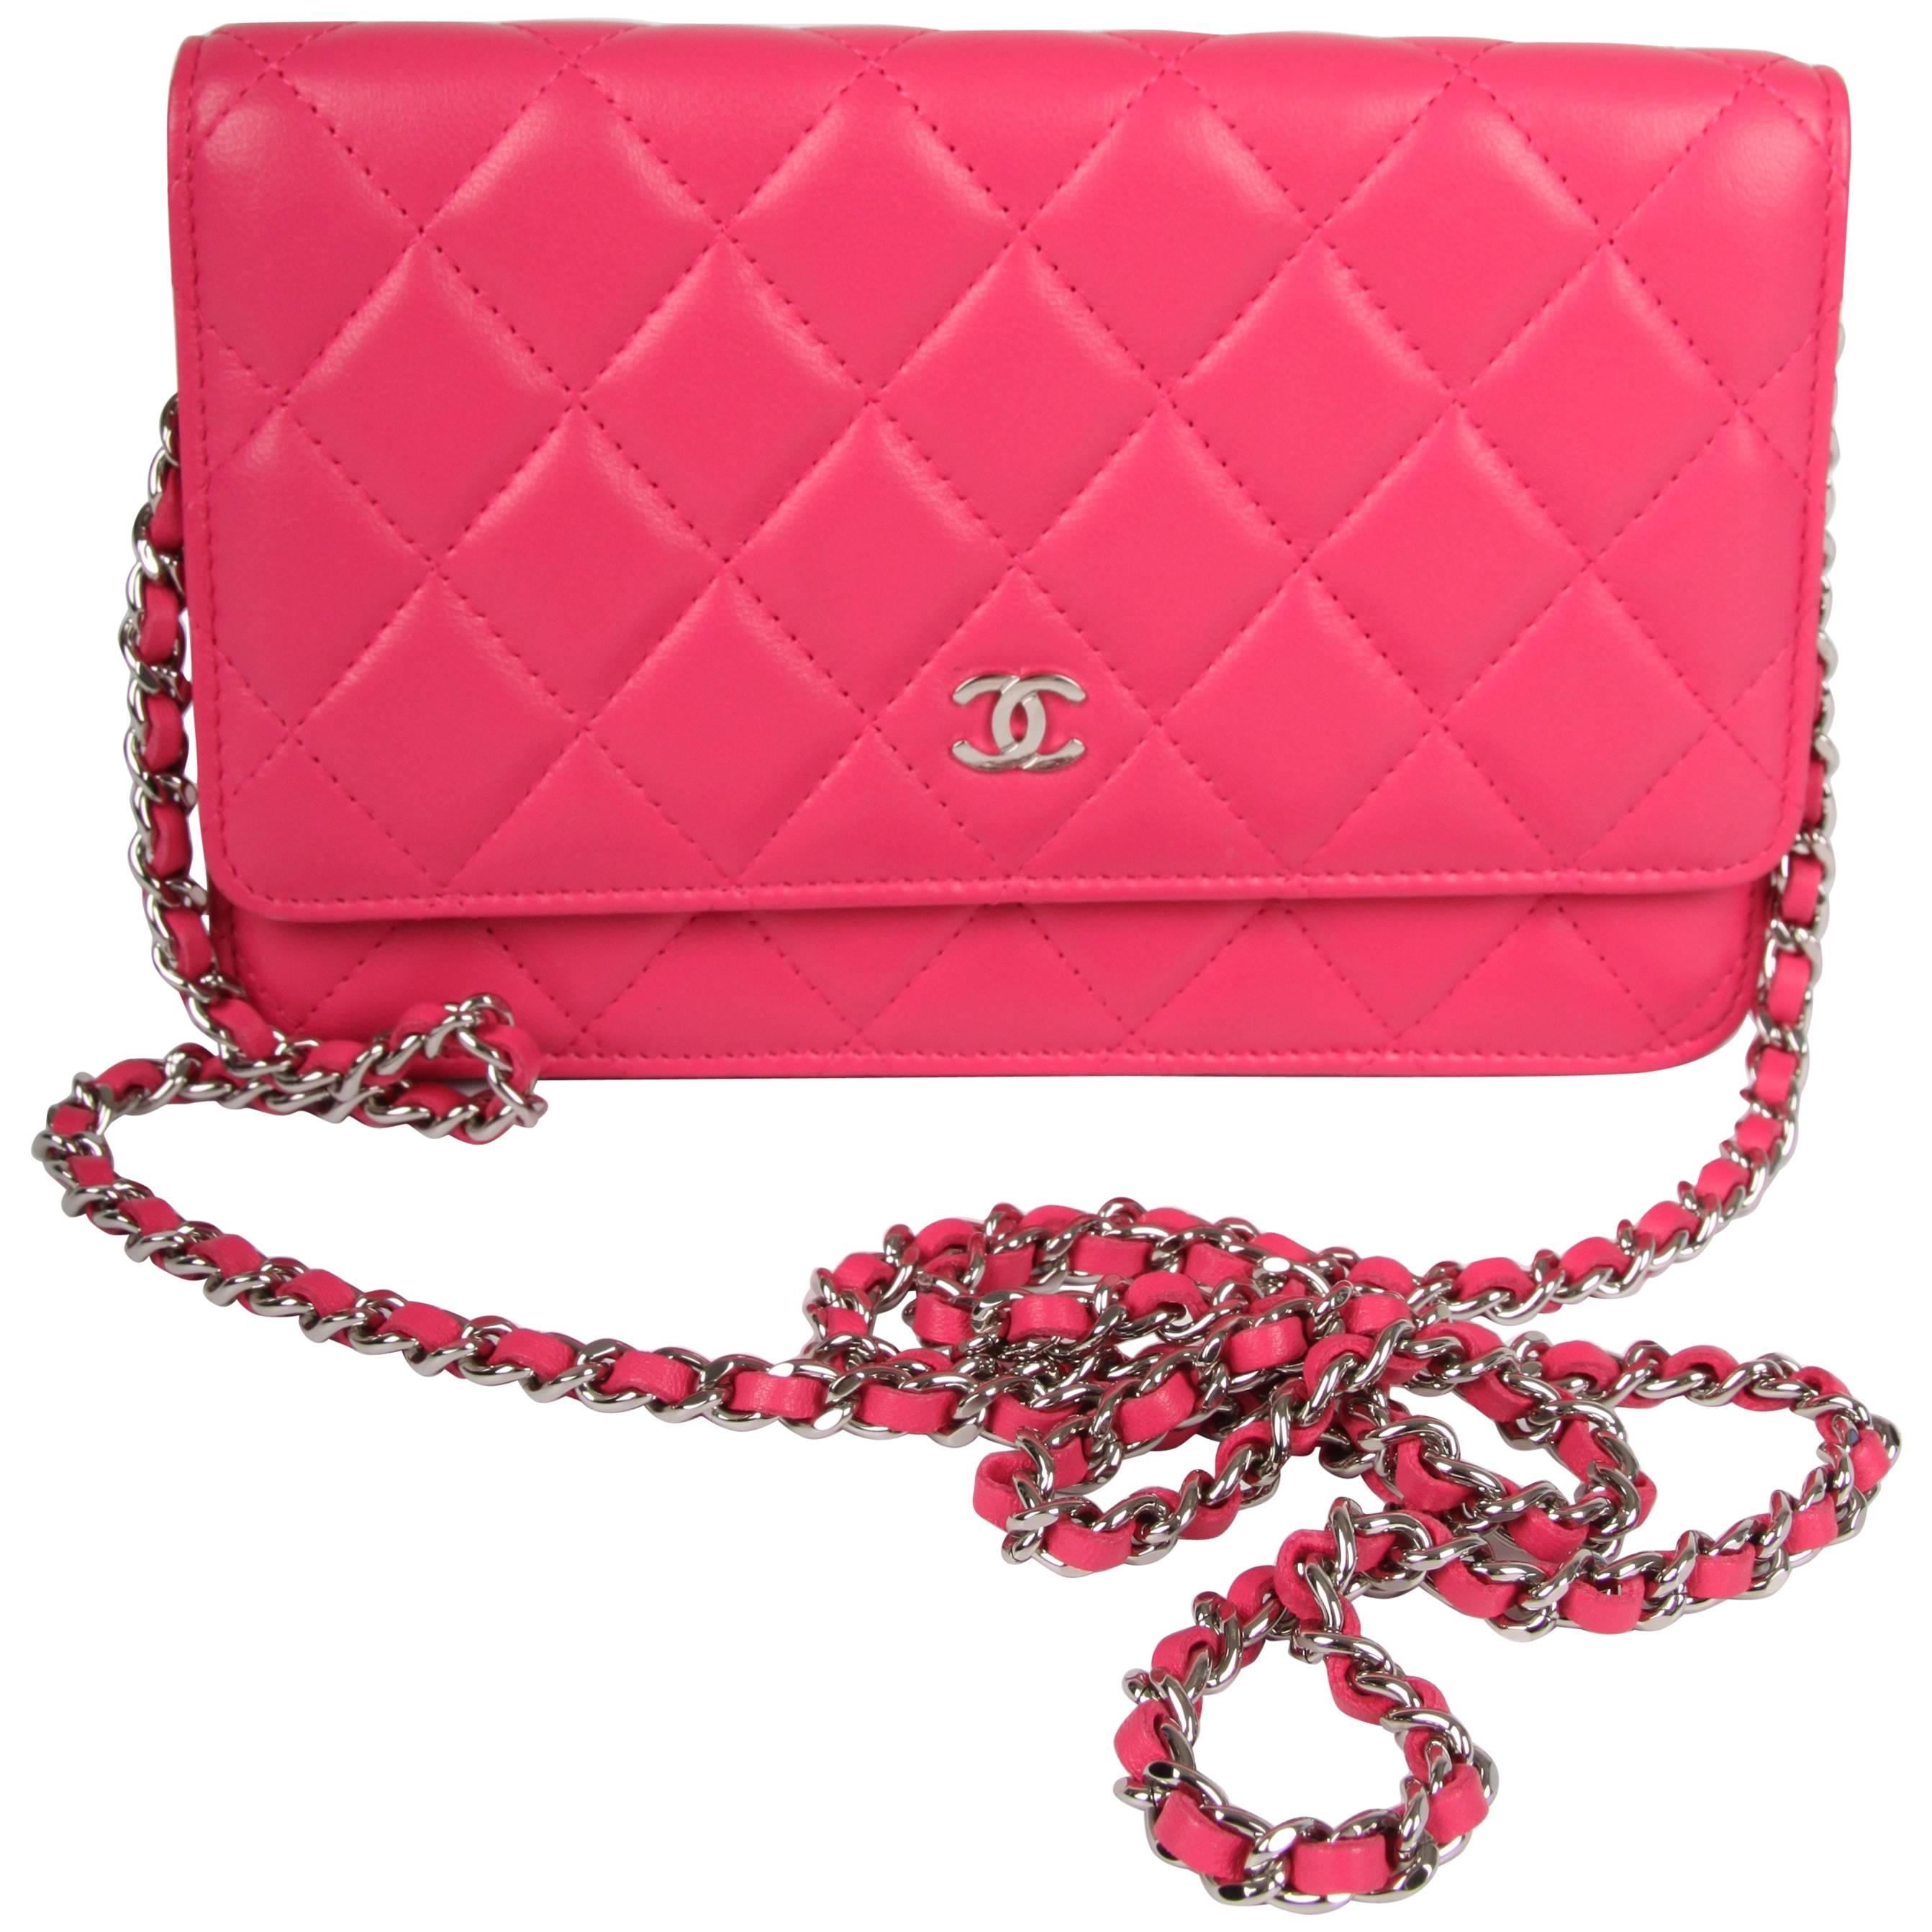 Chanel Wallet On Chain WOC Bag - pink